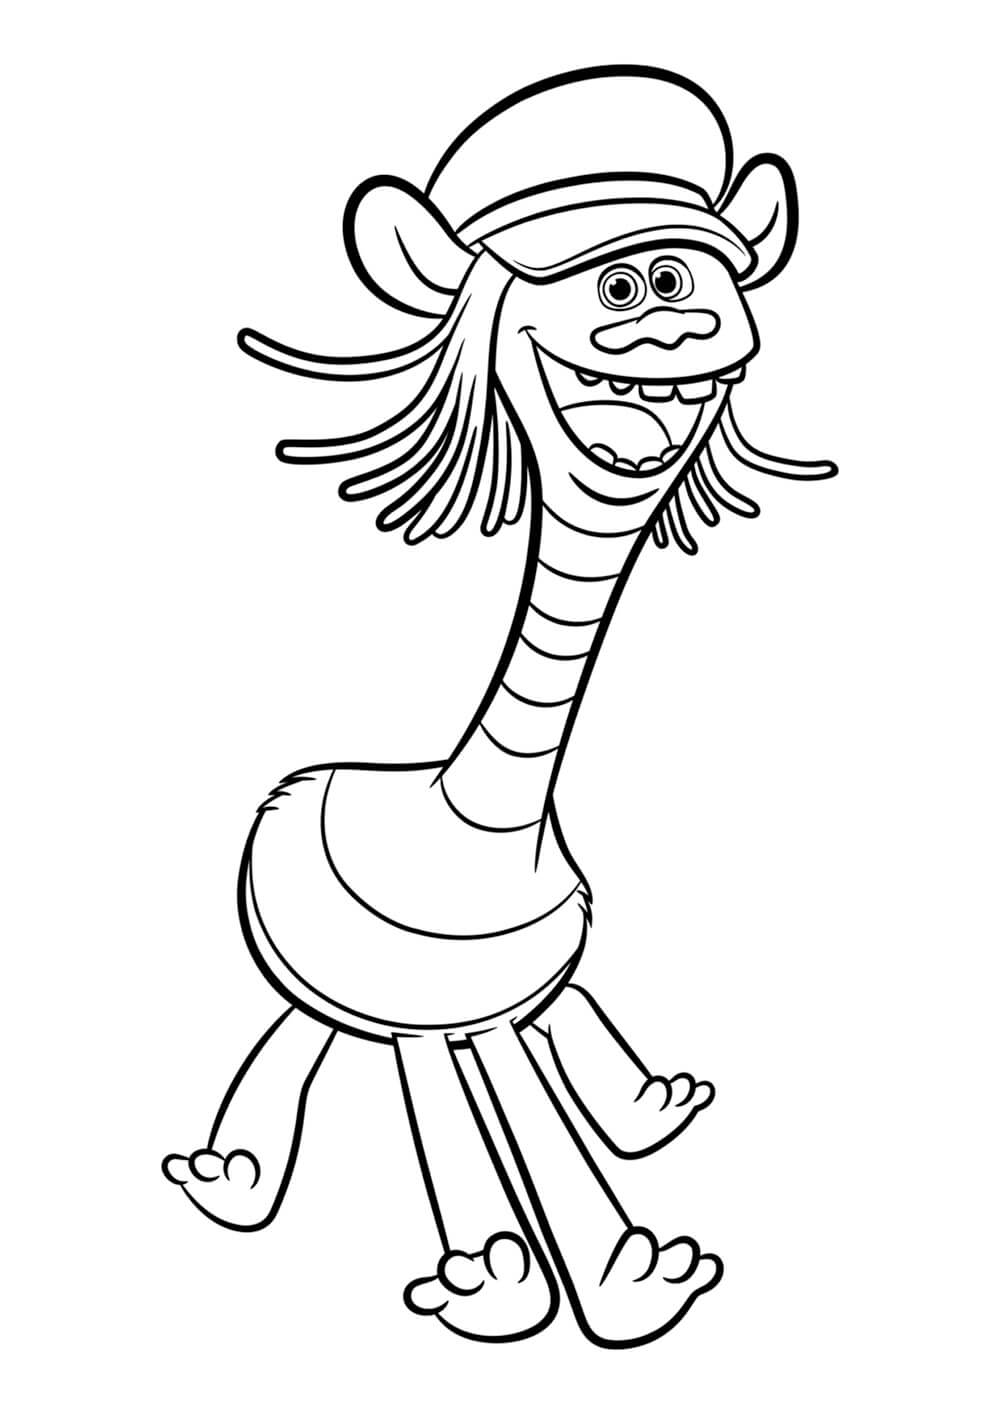 Cooper Trolls Coloring Pages